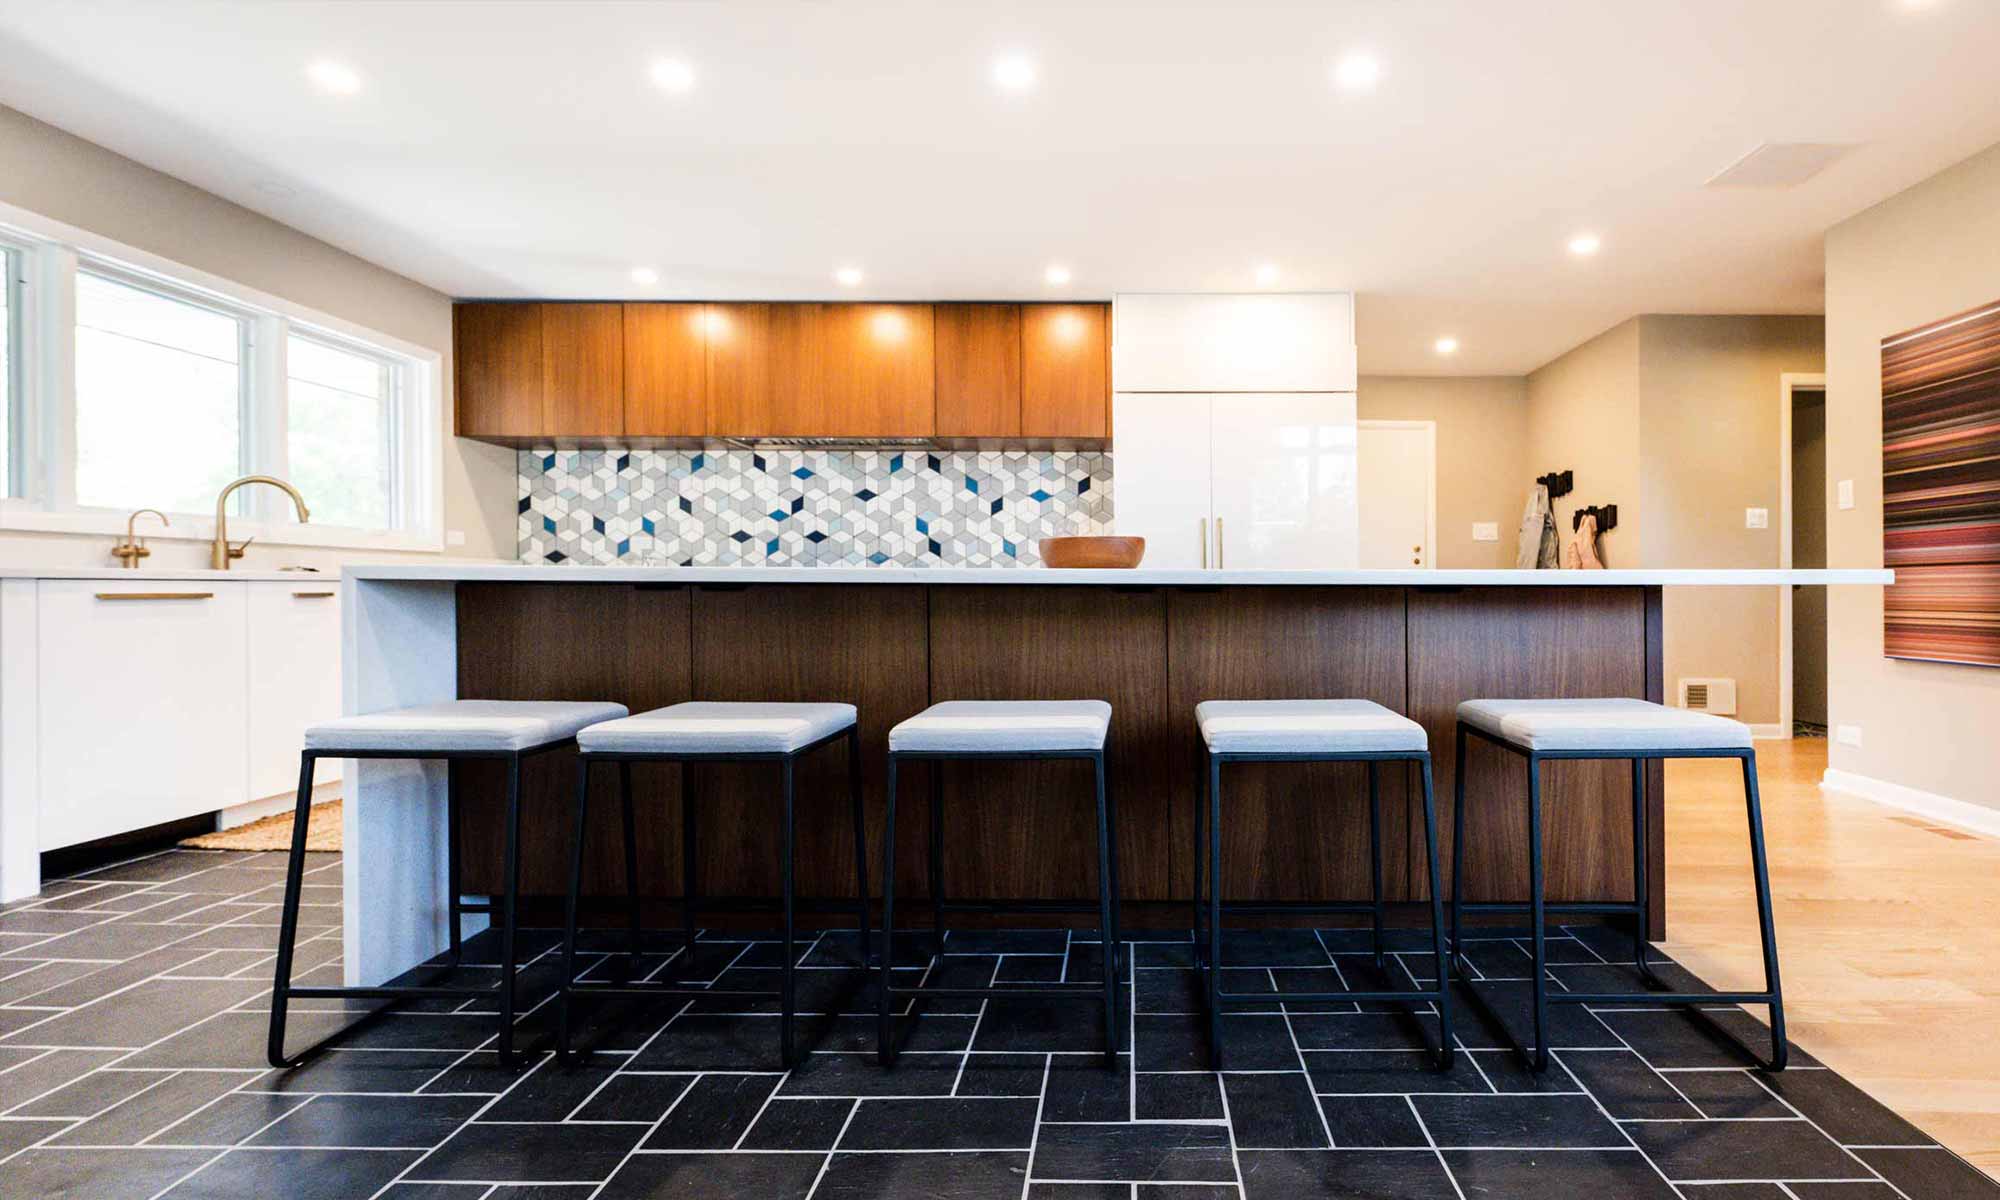 view of barstools at walnut kitchen island with backsplash and wall cabinets beyond